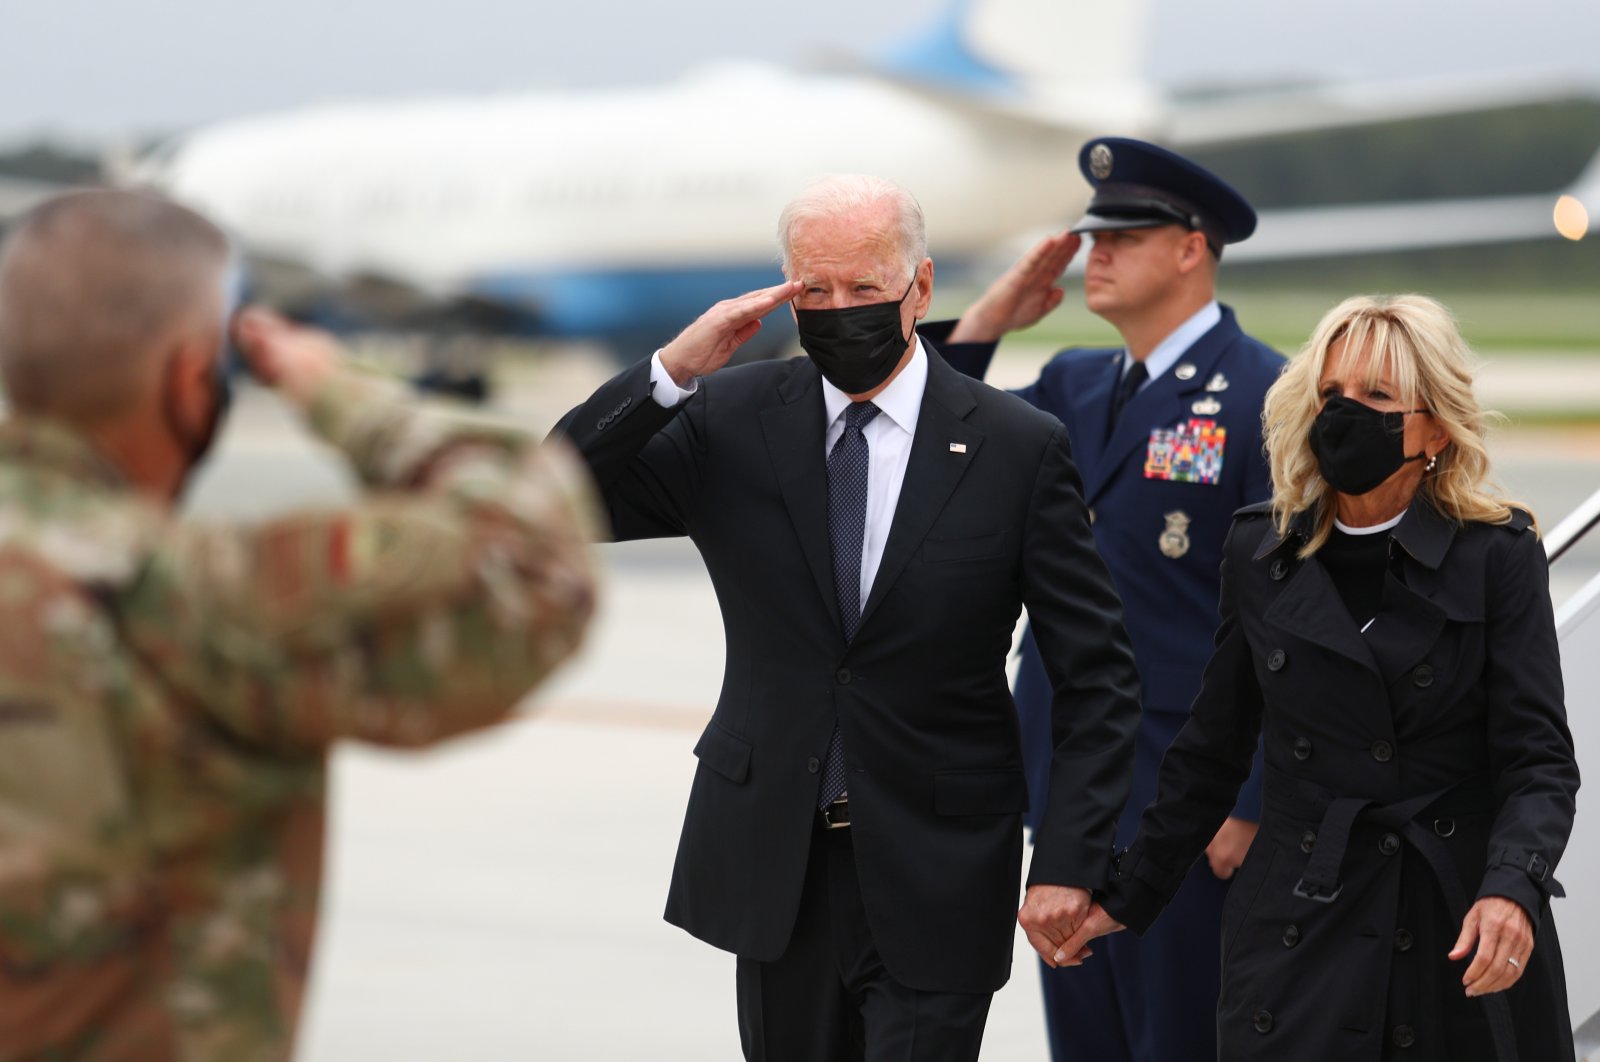 U.S. President Joe Biden and first lady Jill Biden arrive at Dover Air Force Base in Dover, Delaware, U.S., Aug. 29, 2021. (REUTERS Photo)